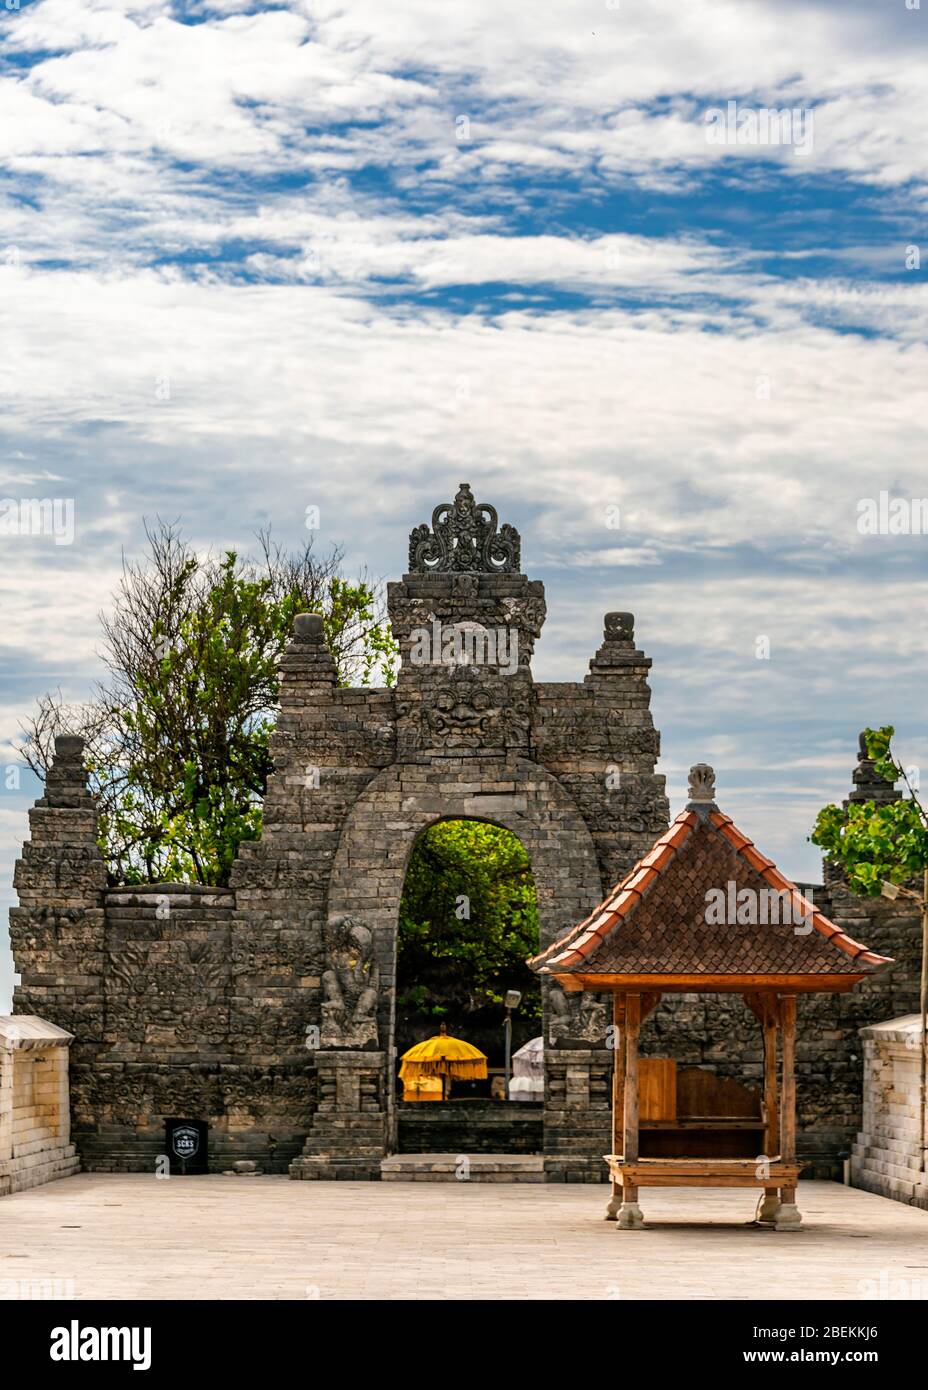 Vertical view of the entrance to Uluwatu temple in Bali, Indonesia. Stock Photo